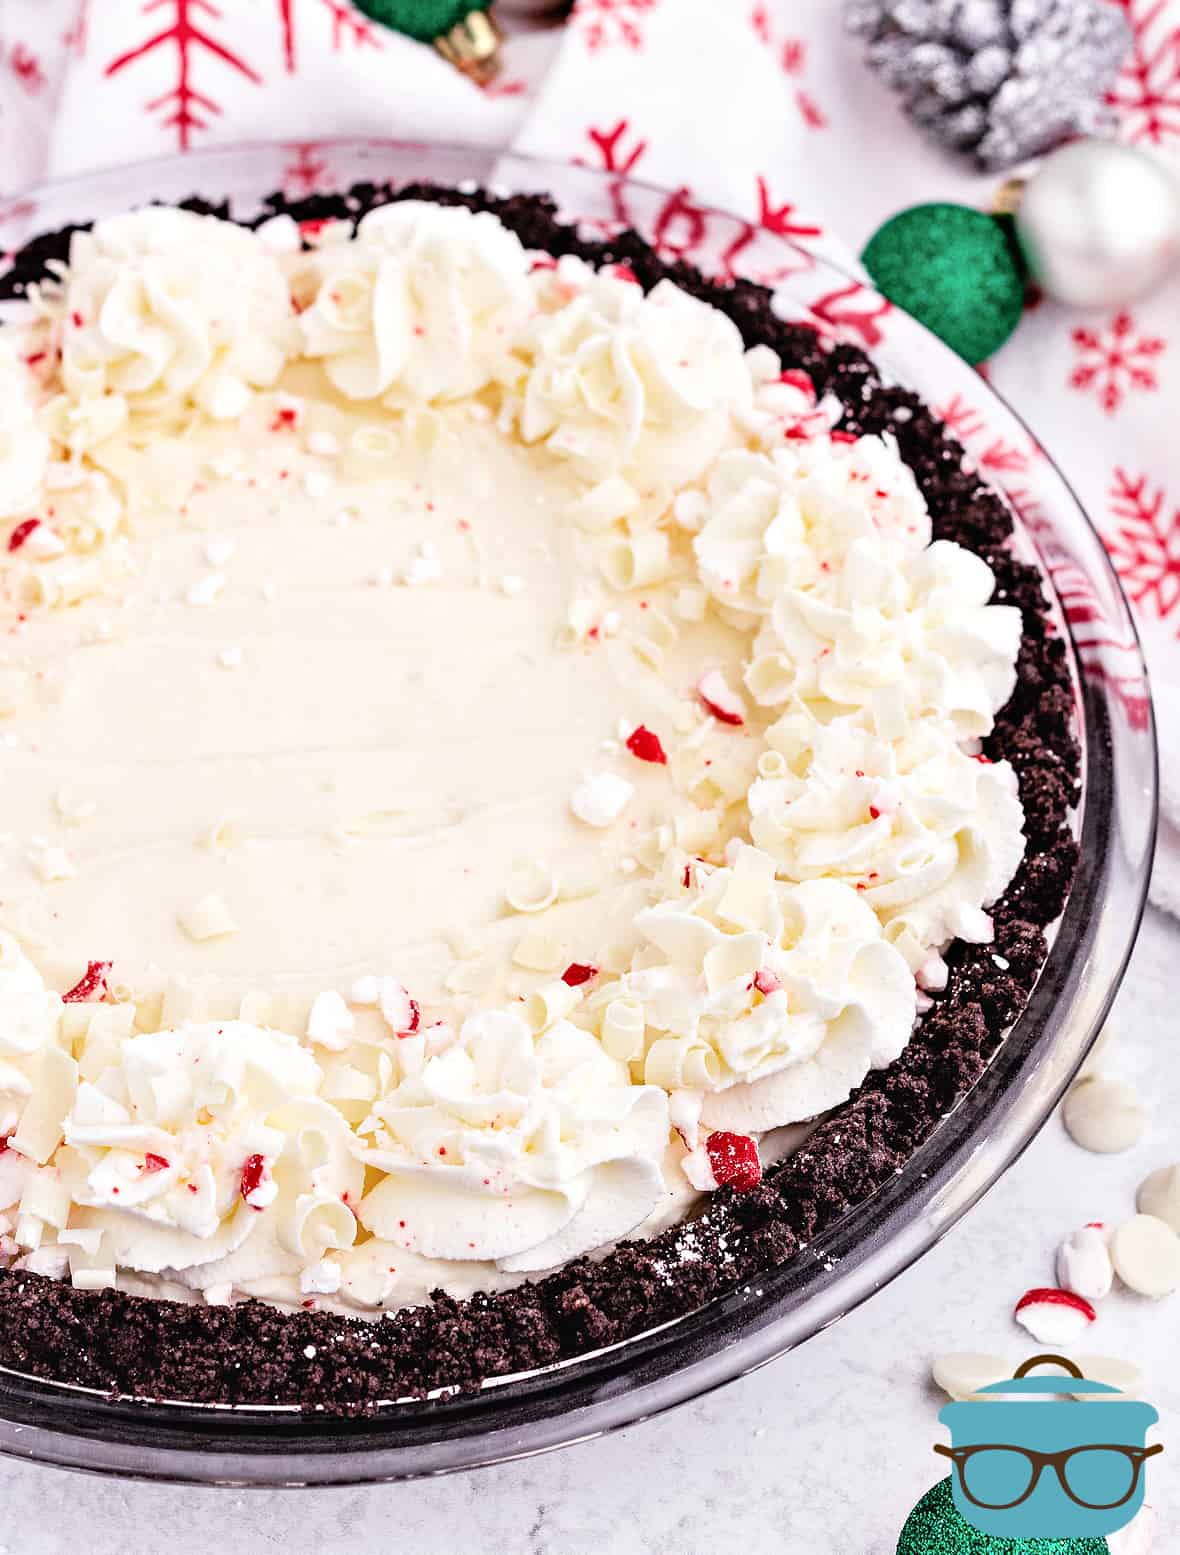 Peppermint Pie with decorated edges and Christmas ornaments on the side.